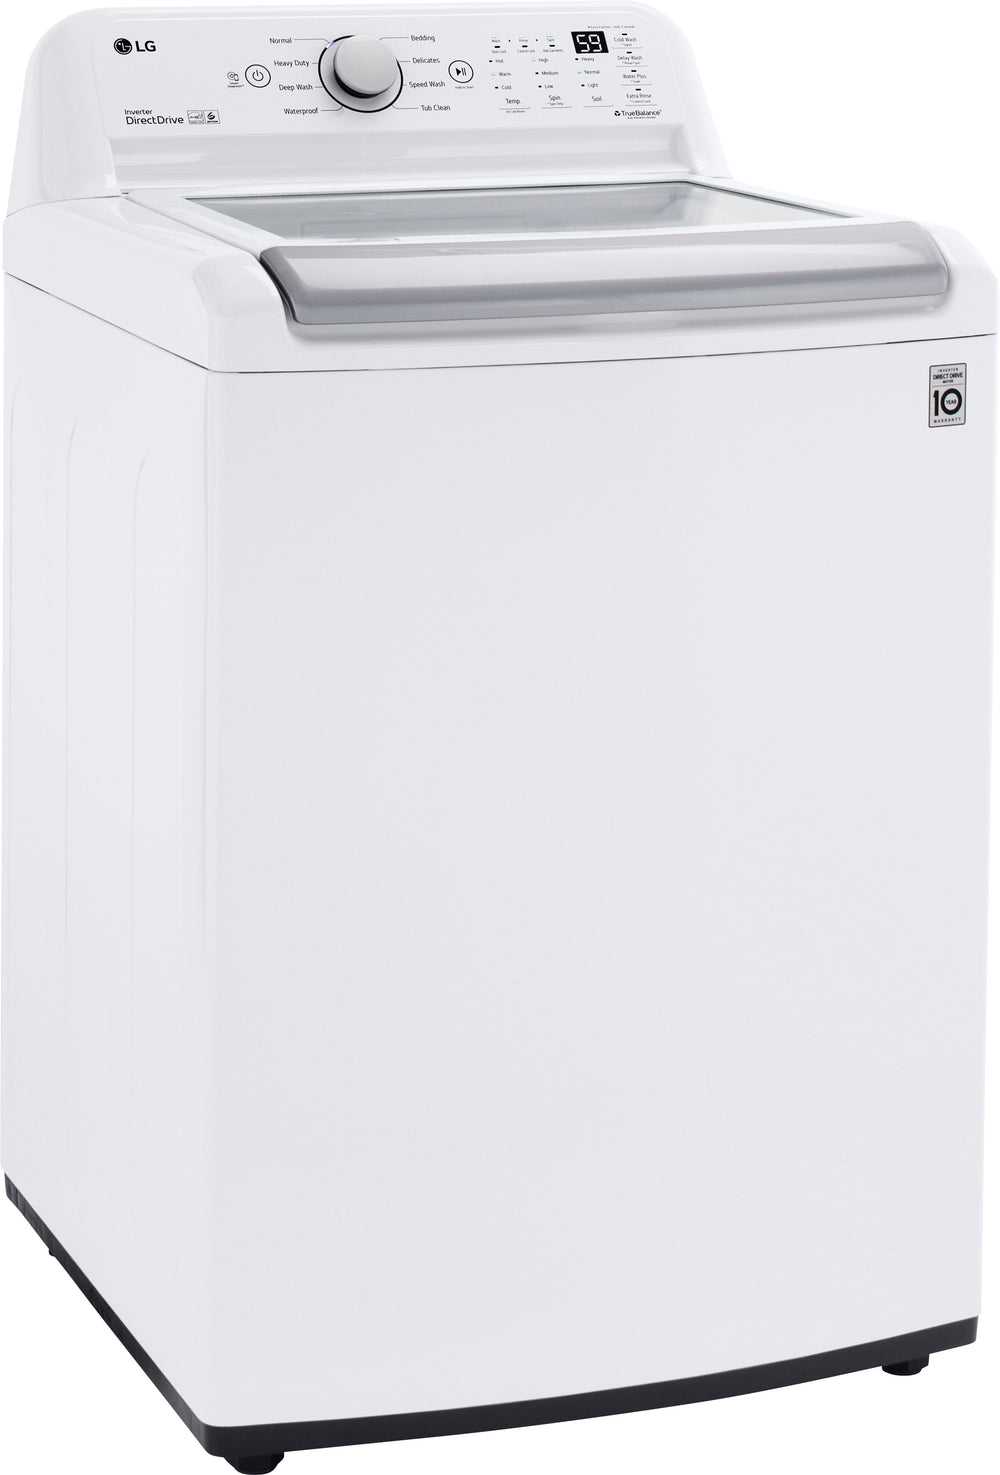 LG - 5.0 Cu. Ft. Smart Top Load Washer with 6Motion Technology - White_1